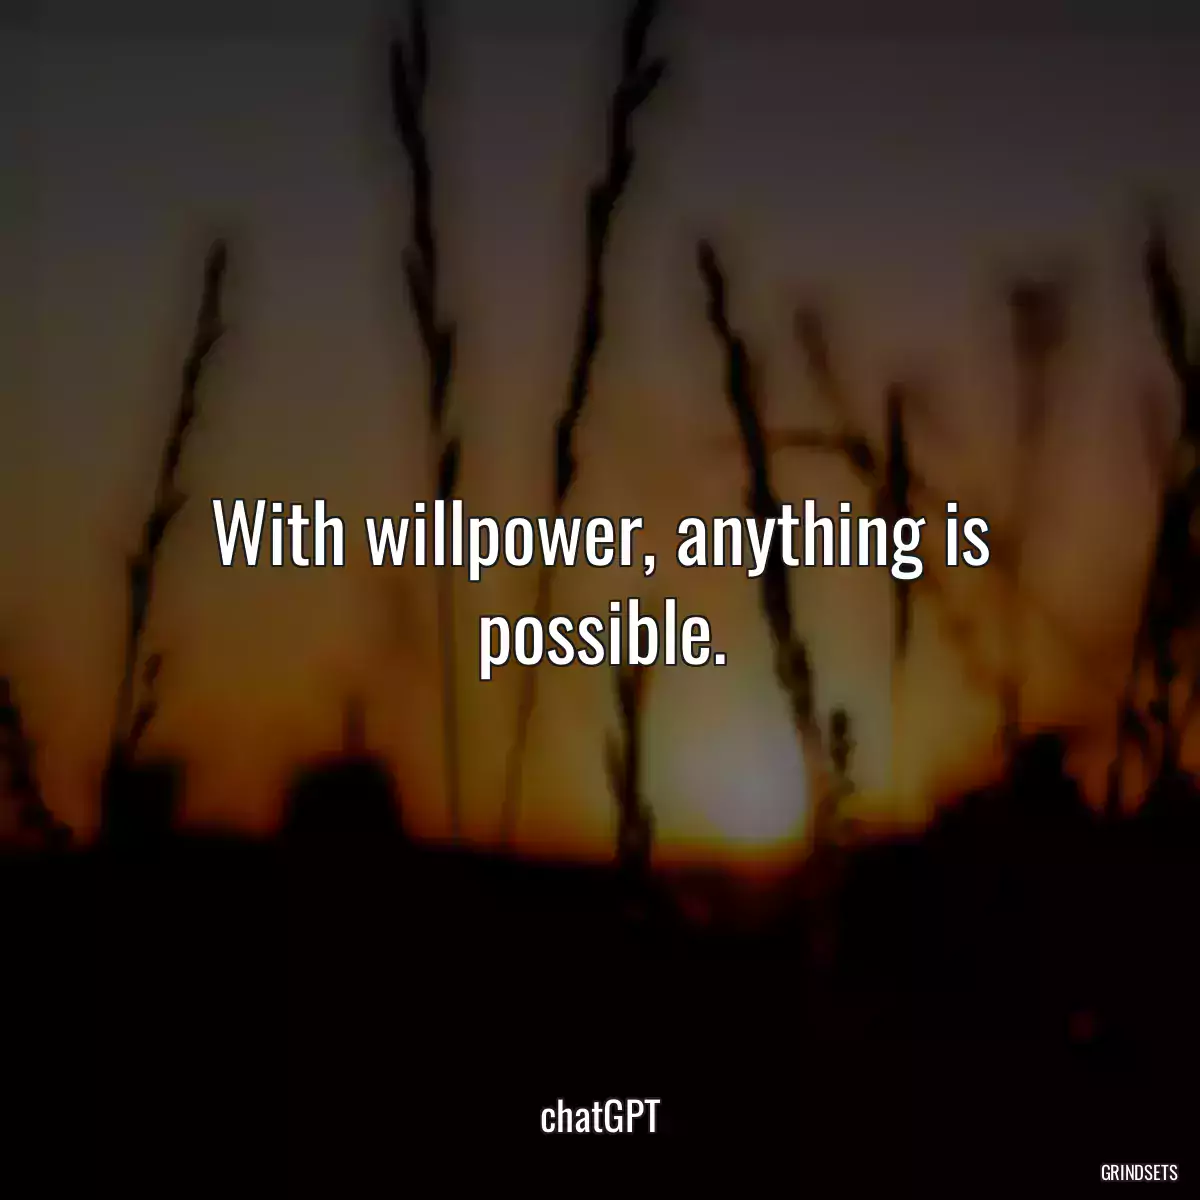 With willpower, anything is possible.